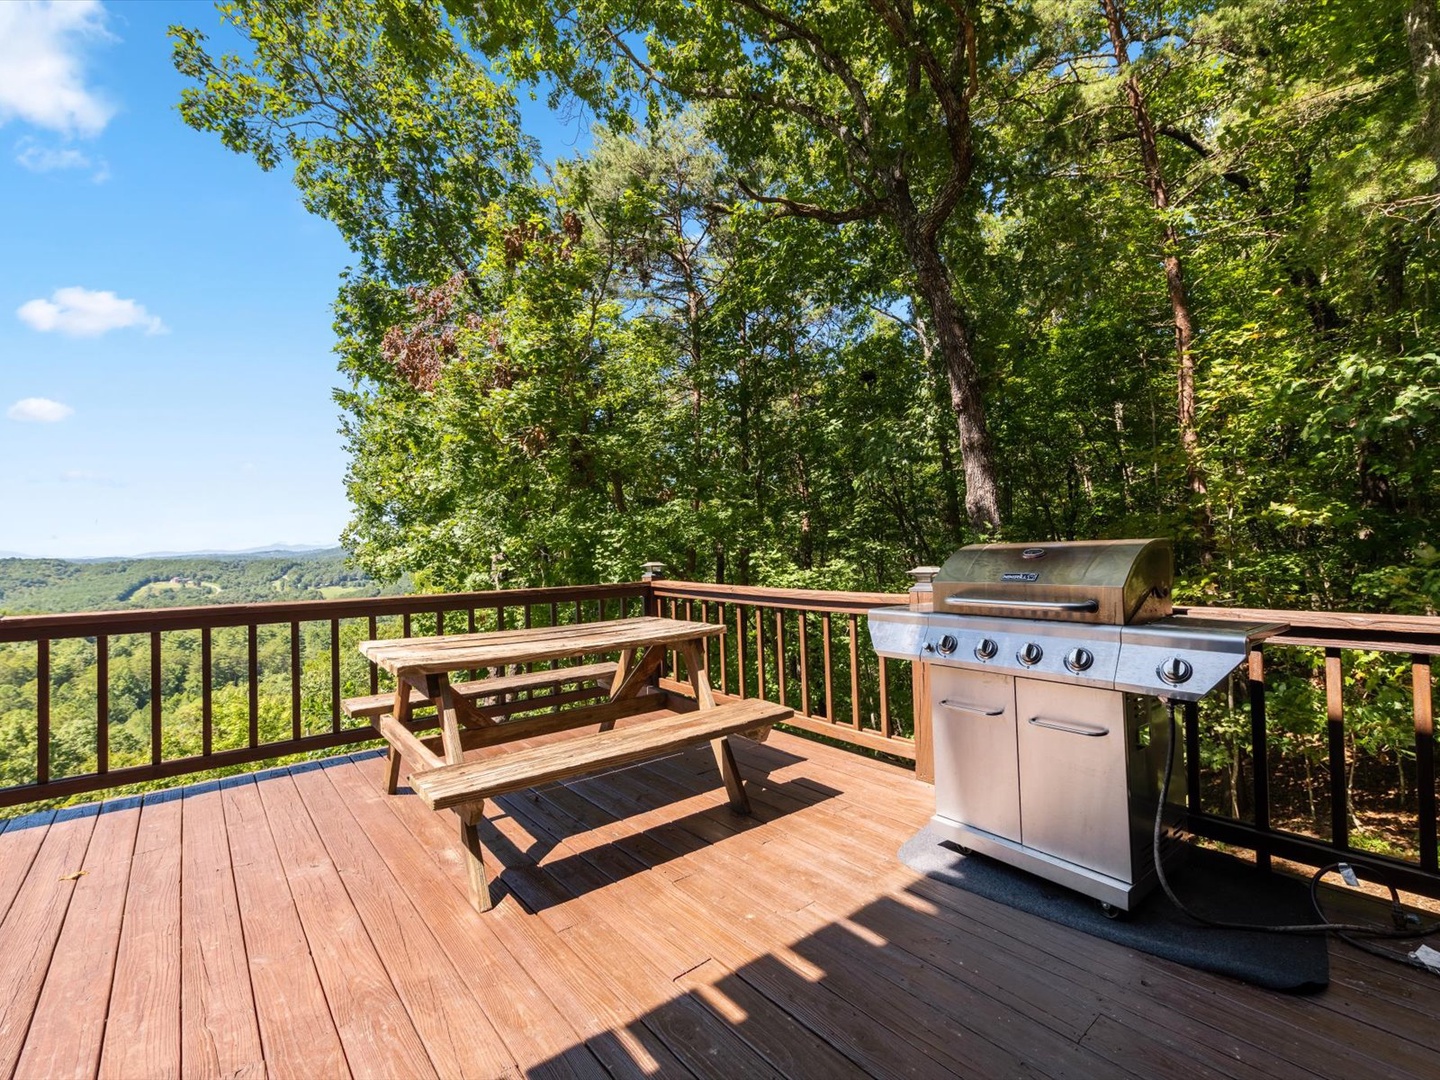 Bear Necessities- Entry level deck with a picnic table & grill